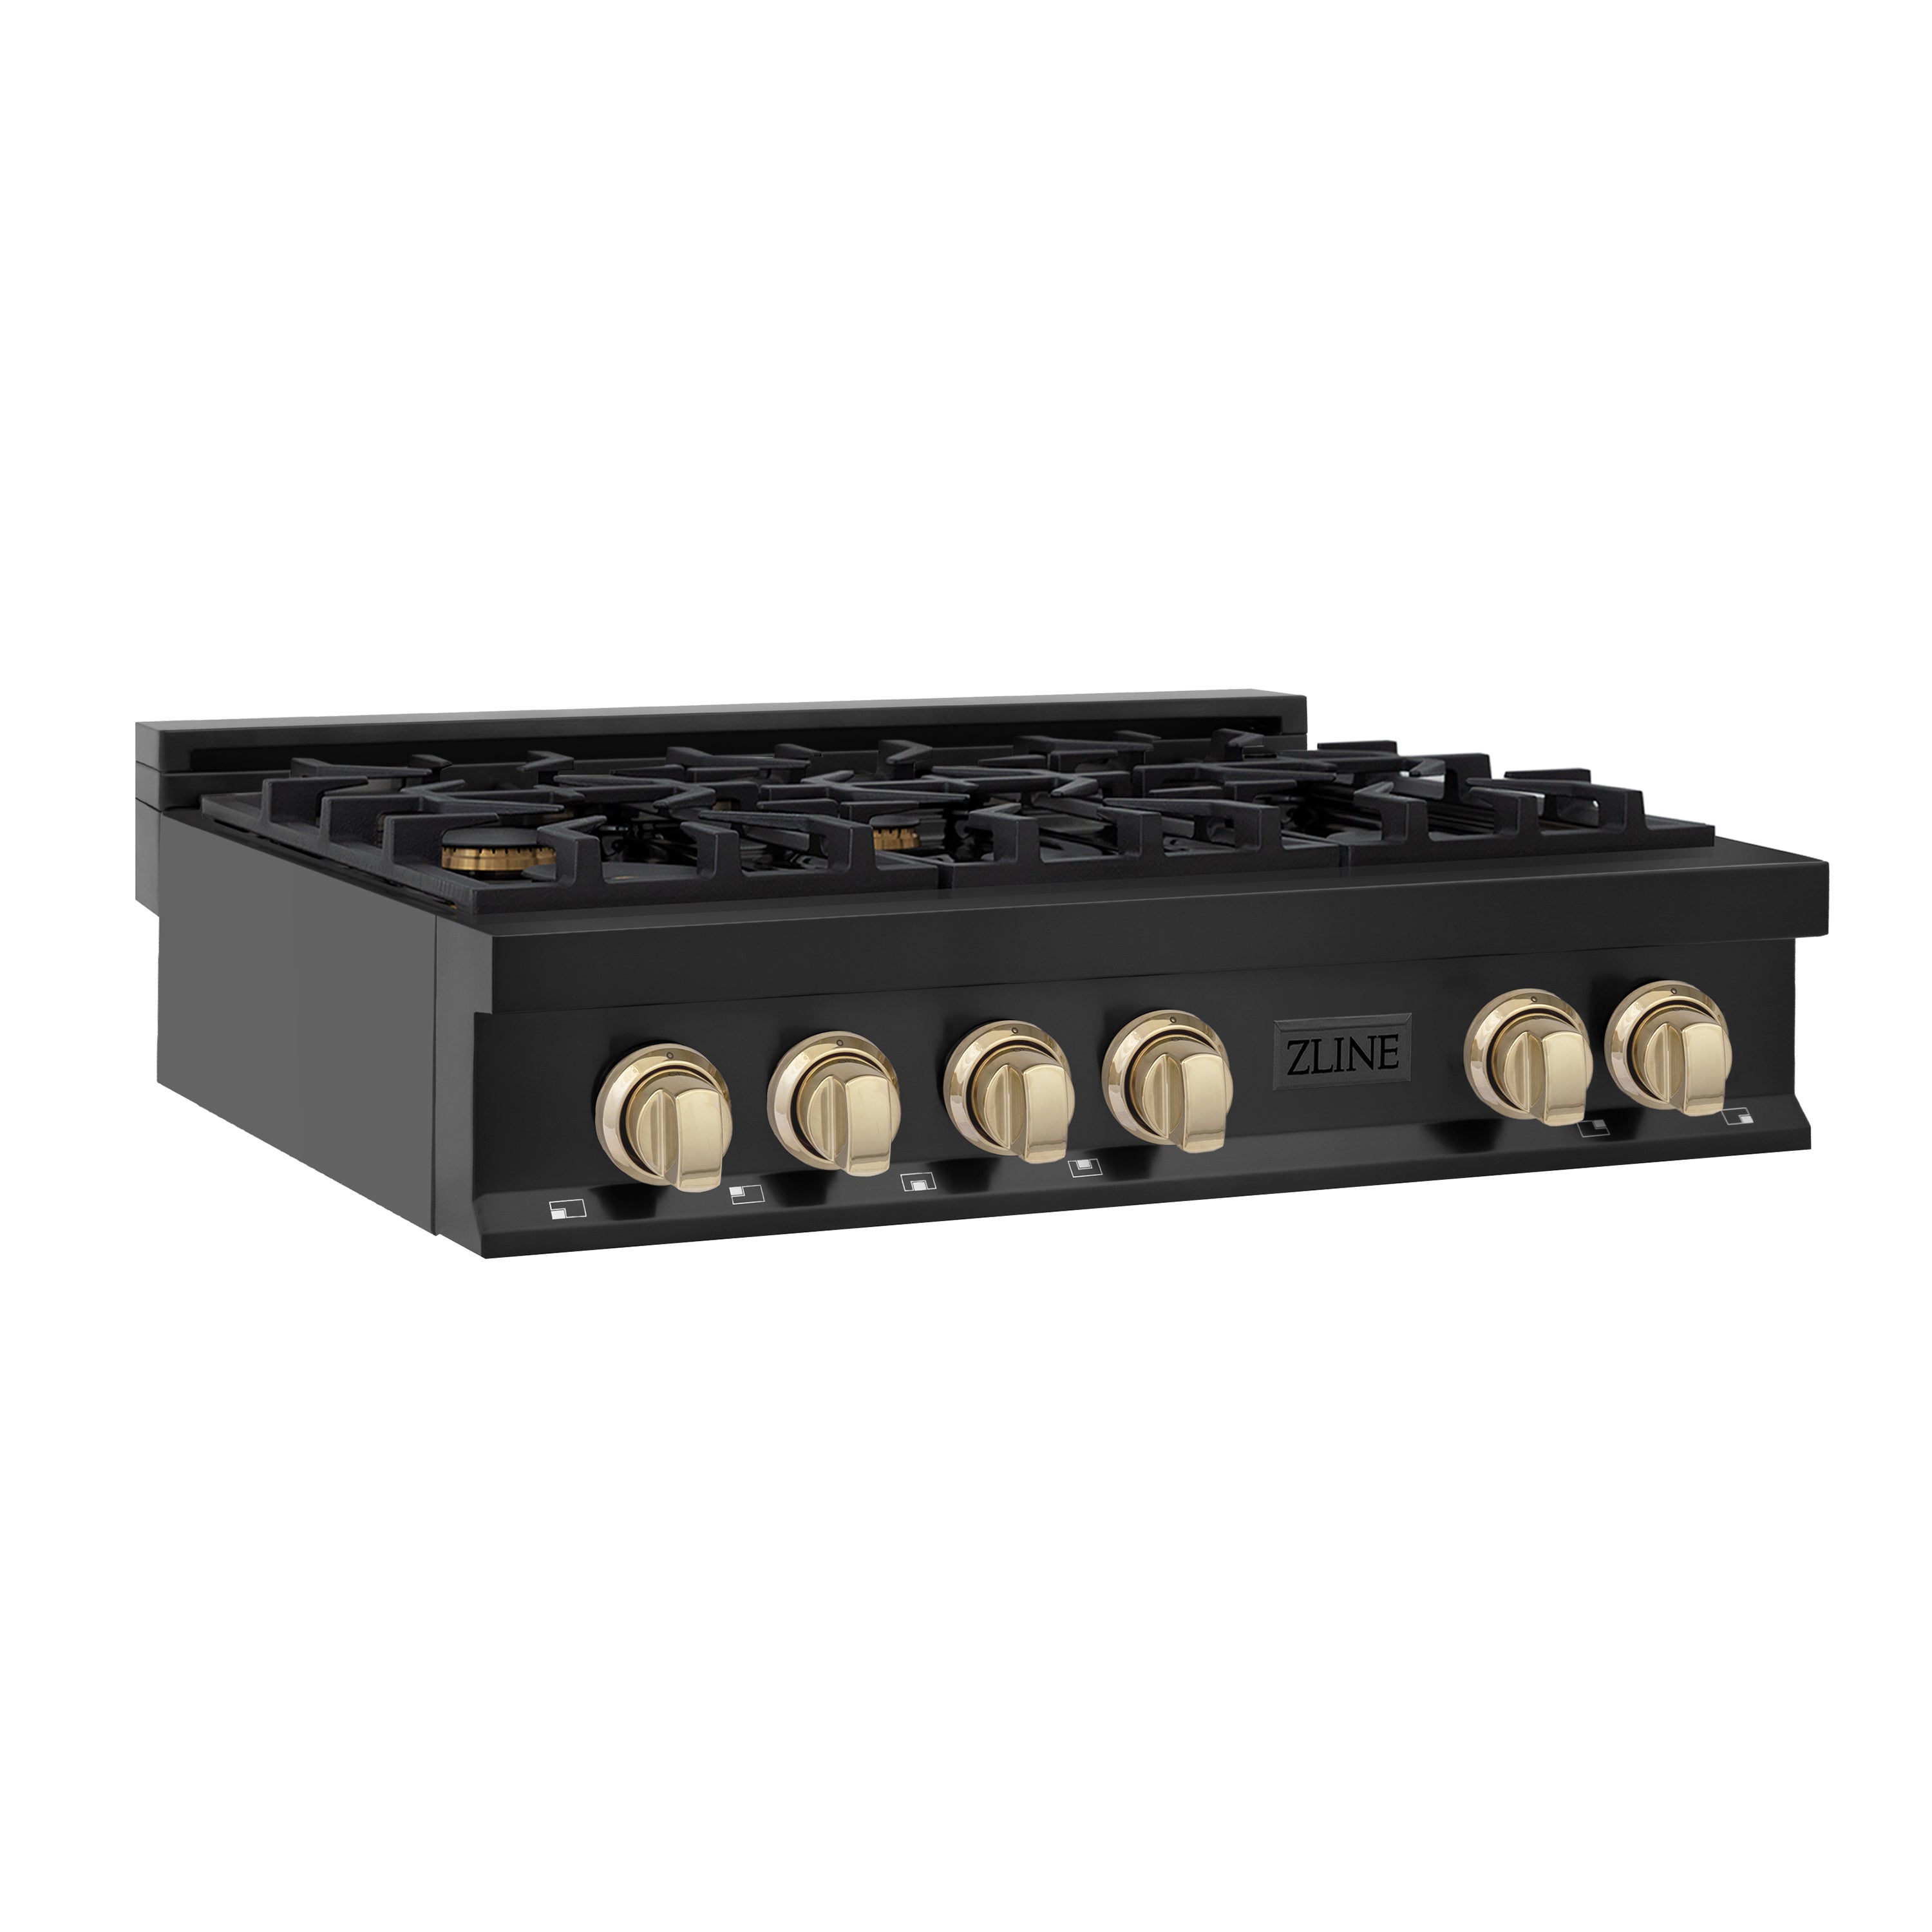 ZLINE Autograph Edition 36" Porcelain Rangetop with 6 Gas Burners in Black Stainless Steel and Polished Gold Accents (RTBZ-36-G)